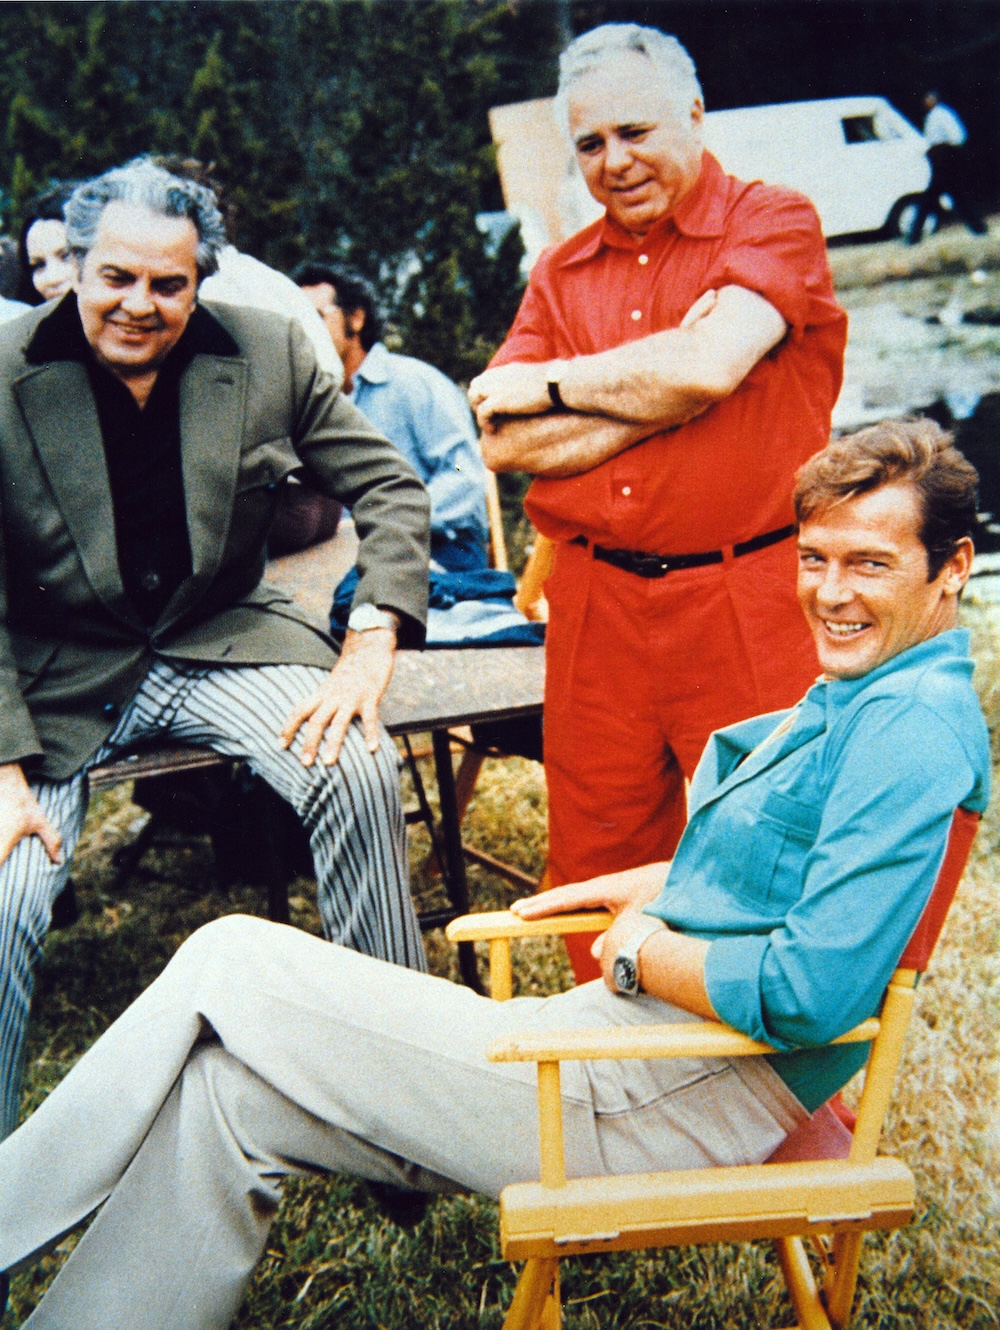 Roger with Bond producers Albert R. "Cubby" Broccoli (left) and Harry Saltzman (right) on the set of Live and Let Die (1973).